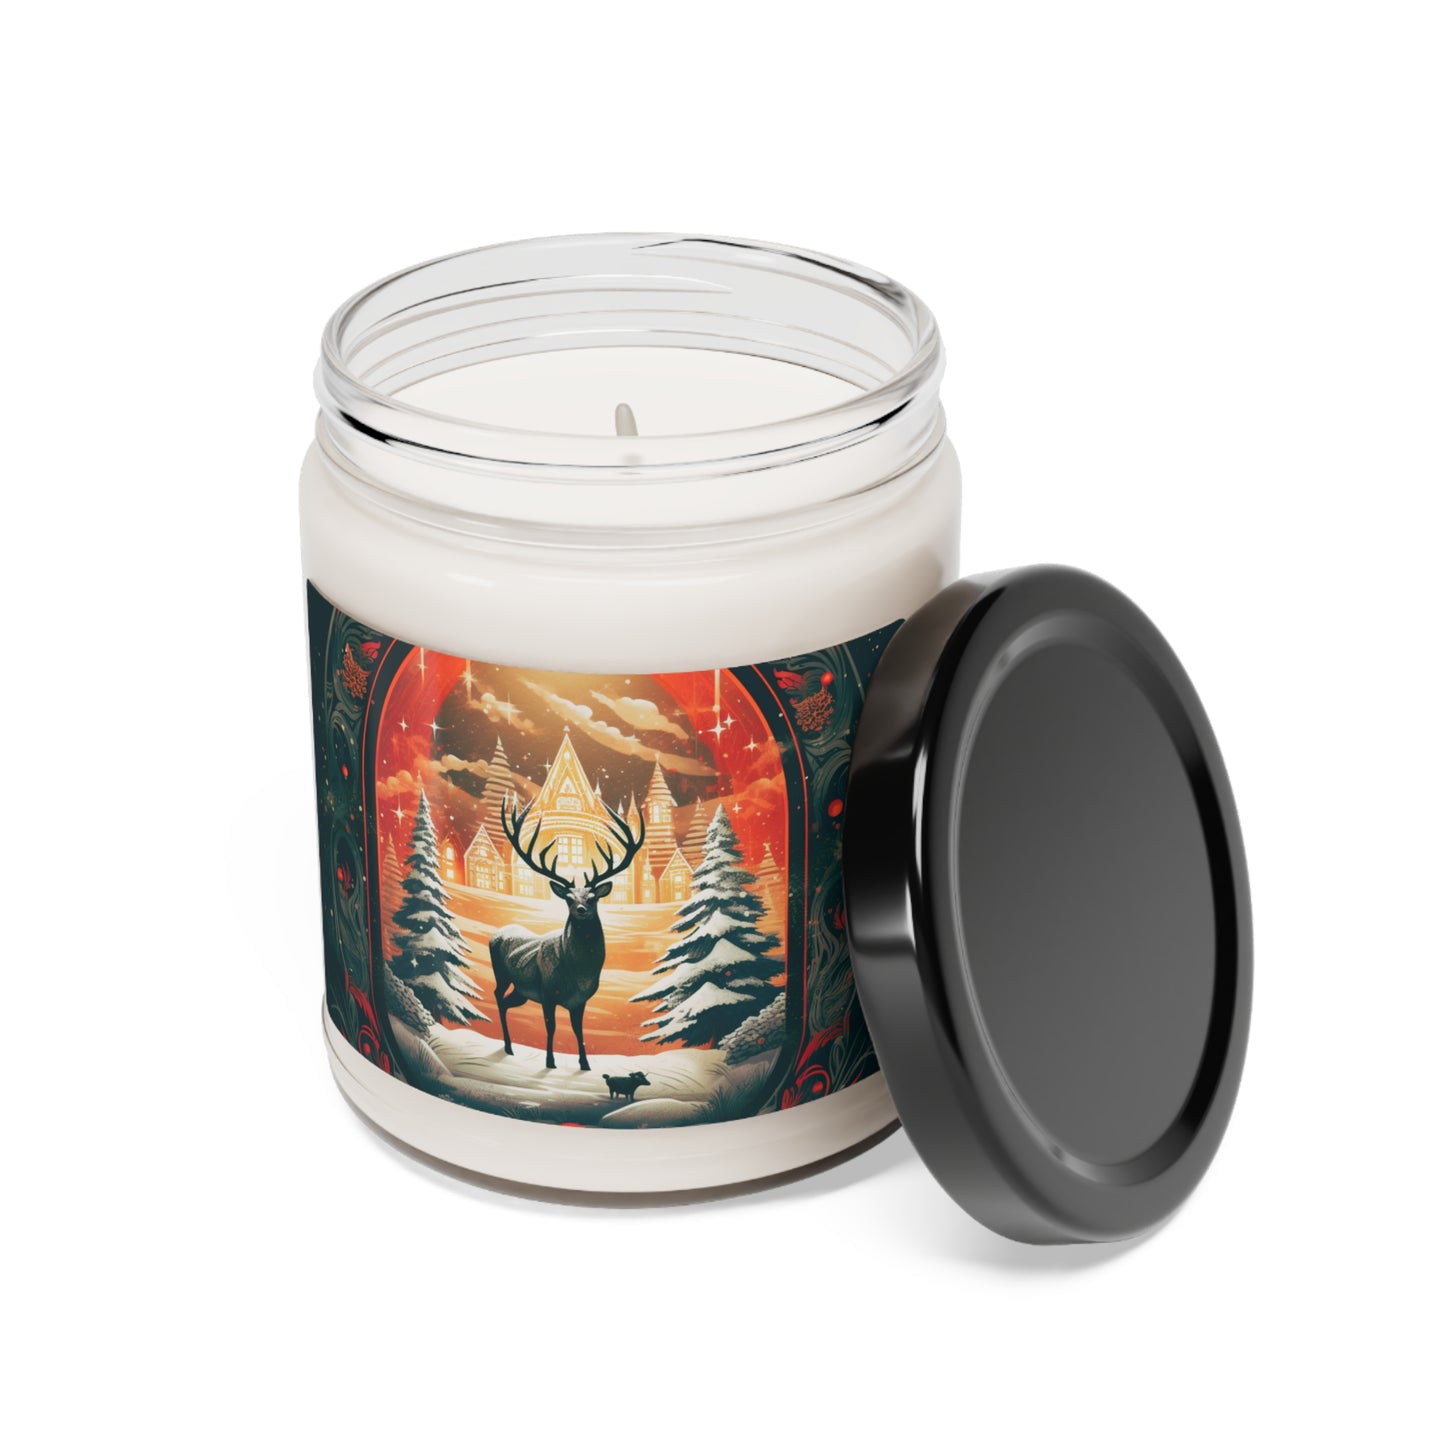 Reindeer in the winter | Scented Soy Candle | 9oz |  50-60 hours of Burning Time